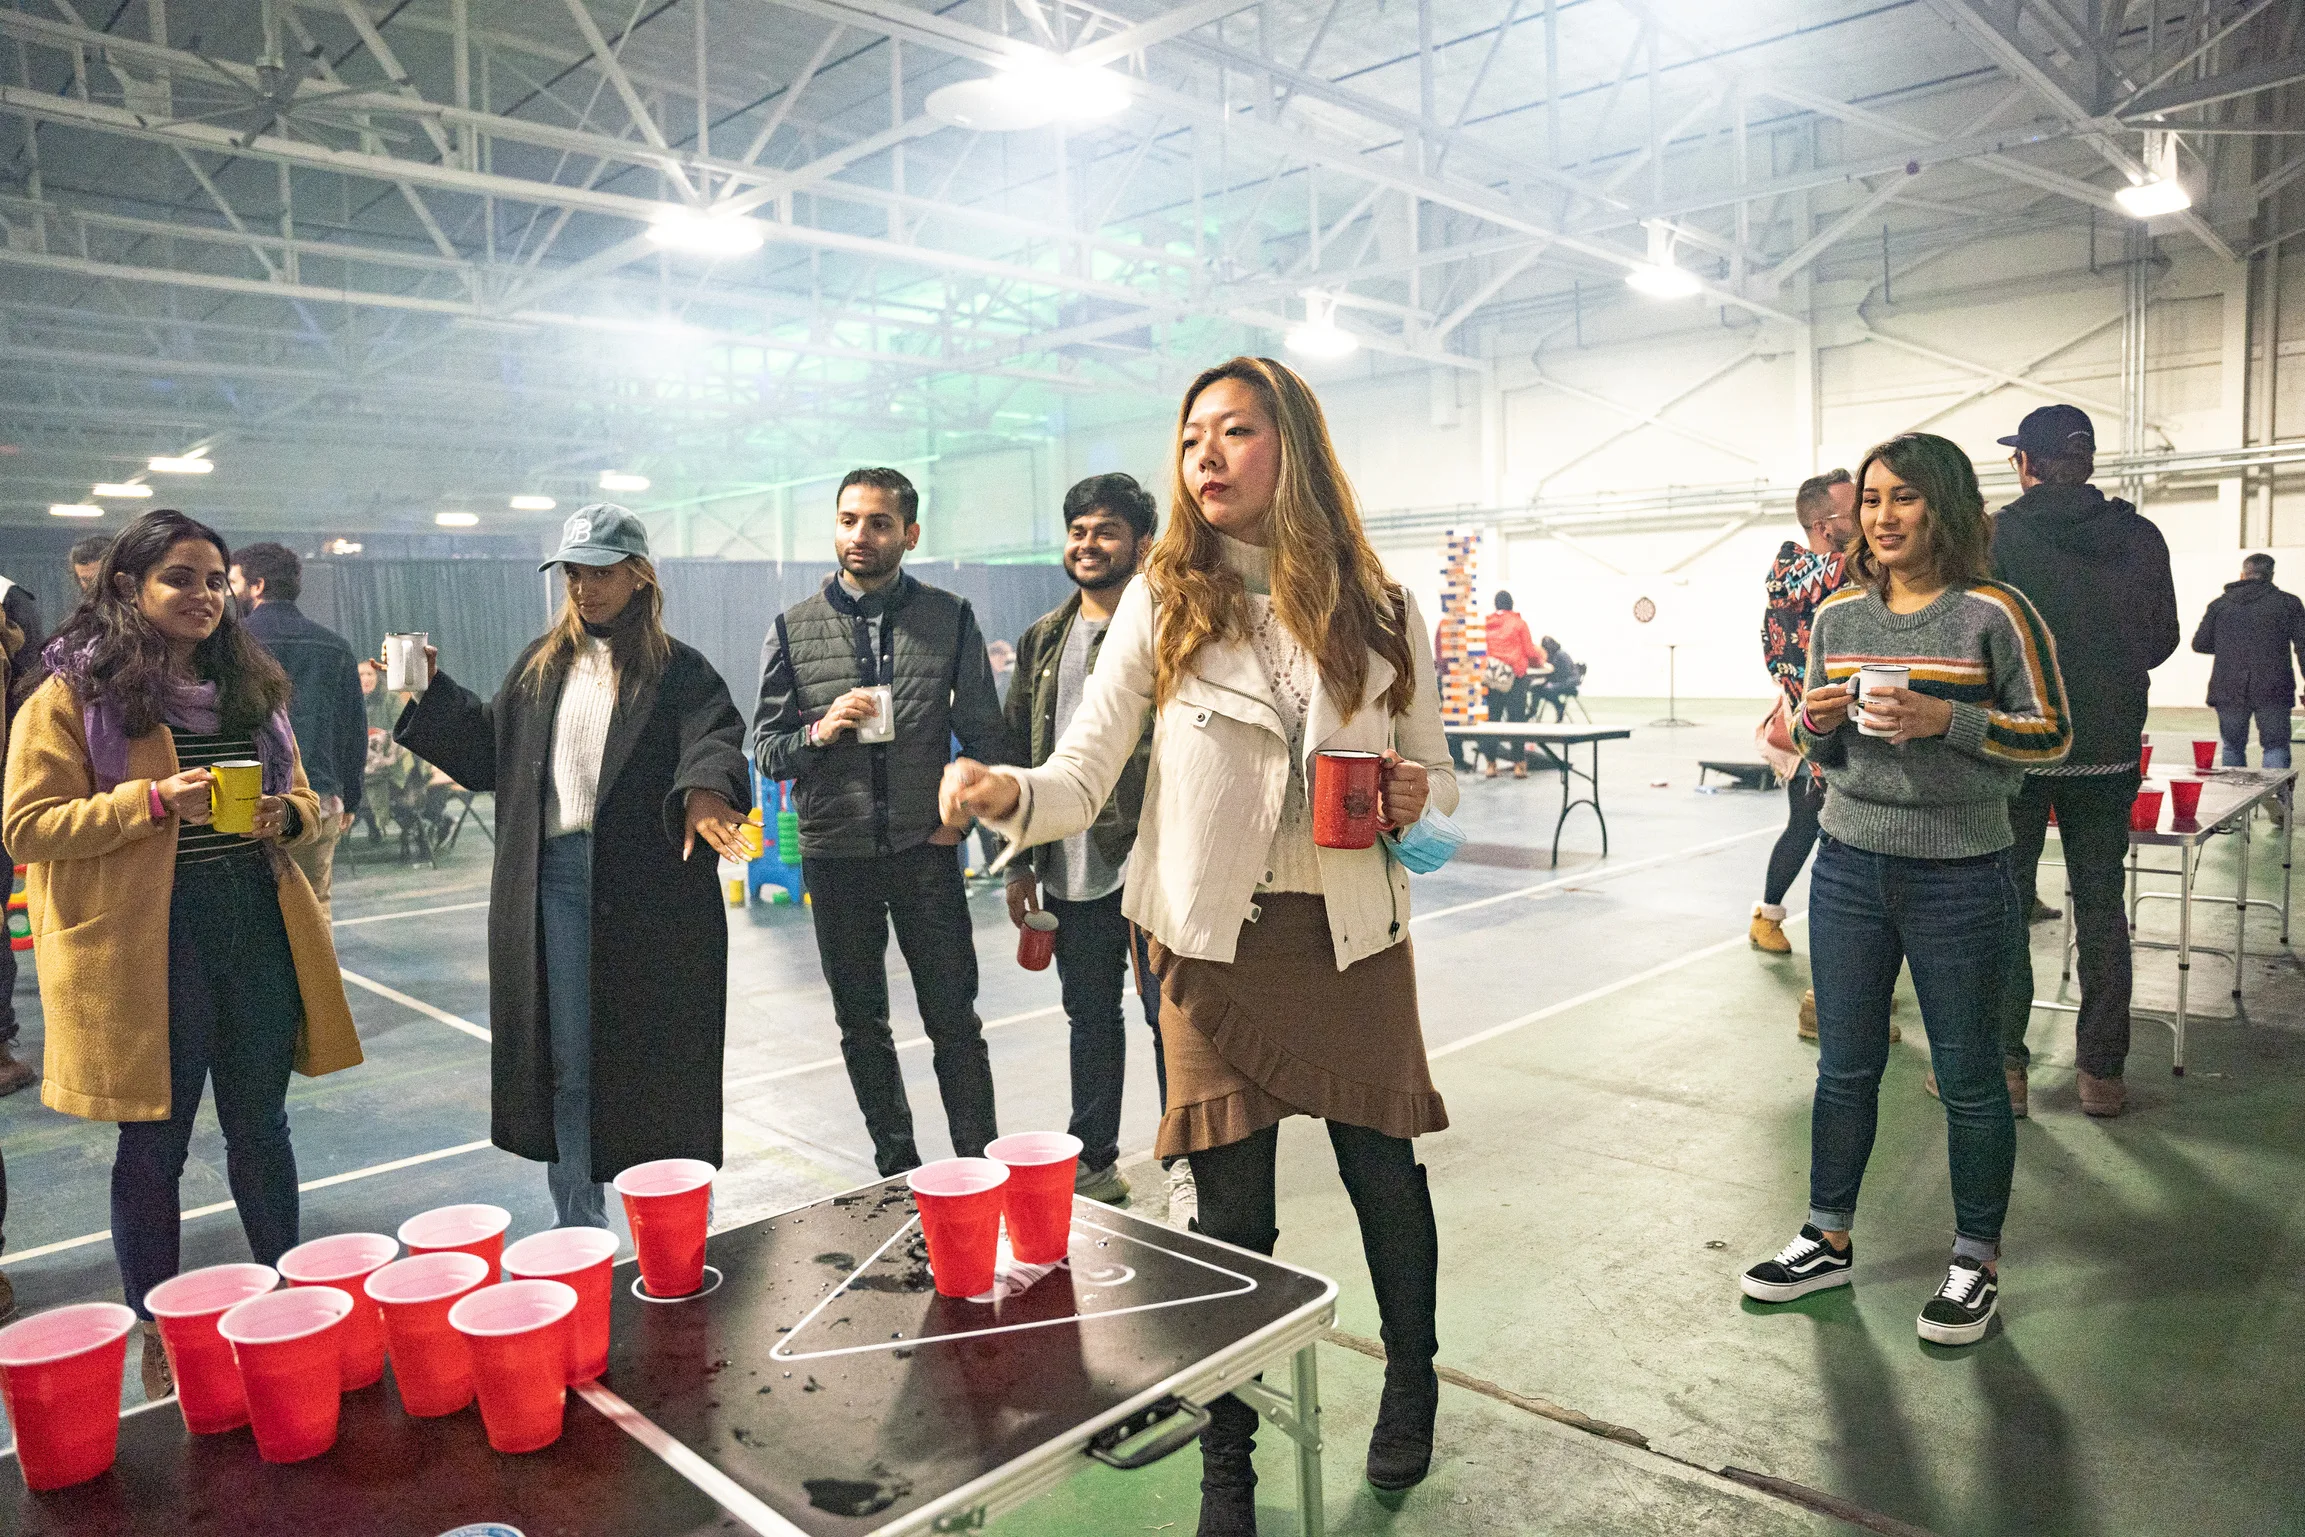 A group of people playing beer pong